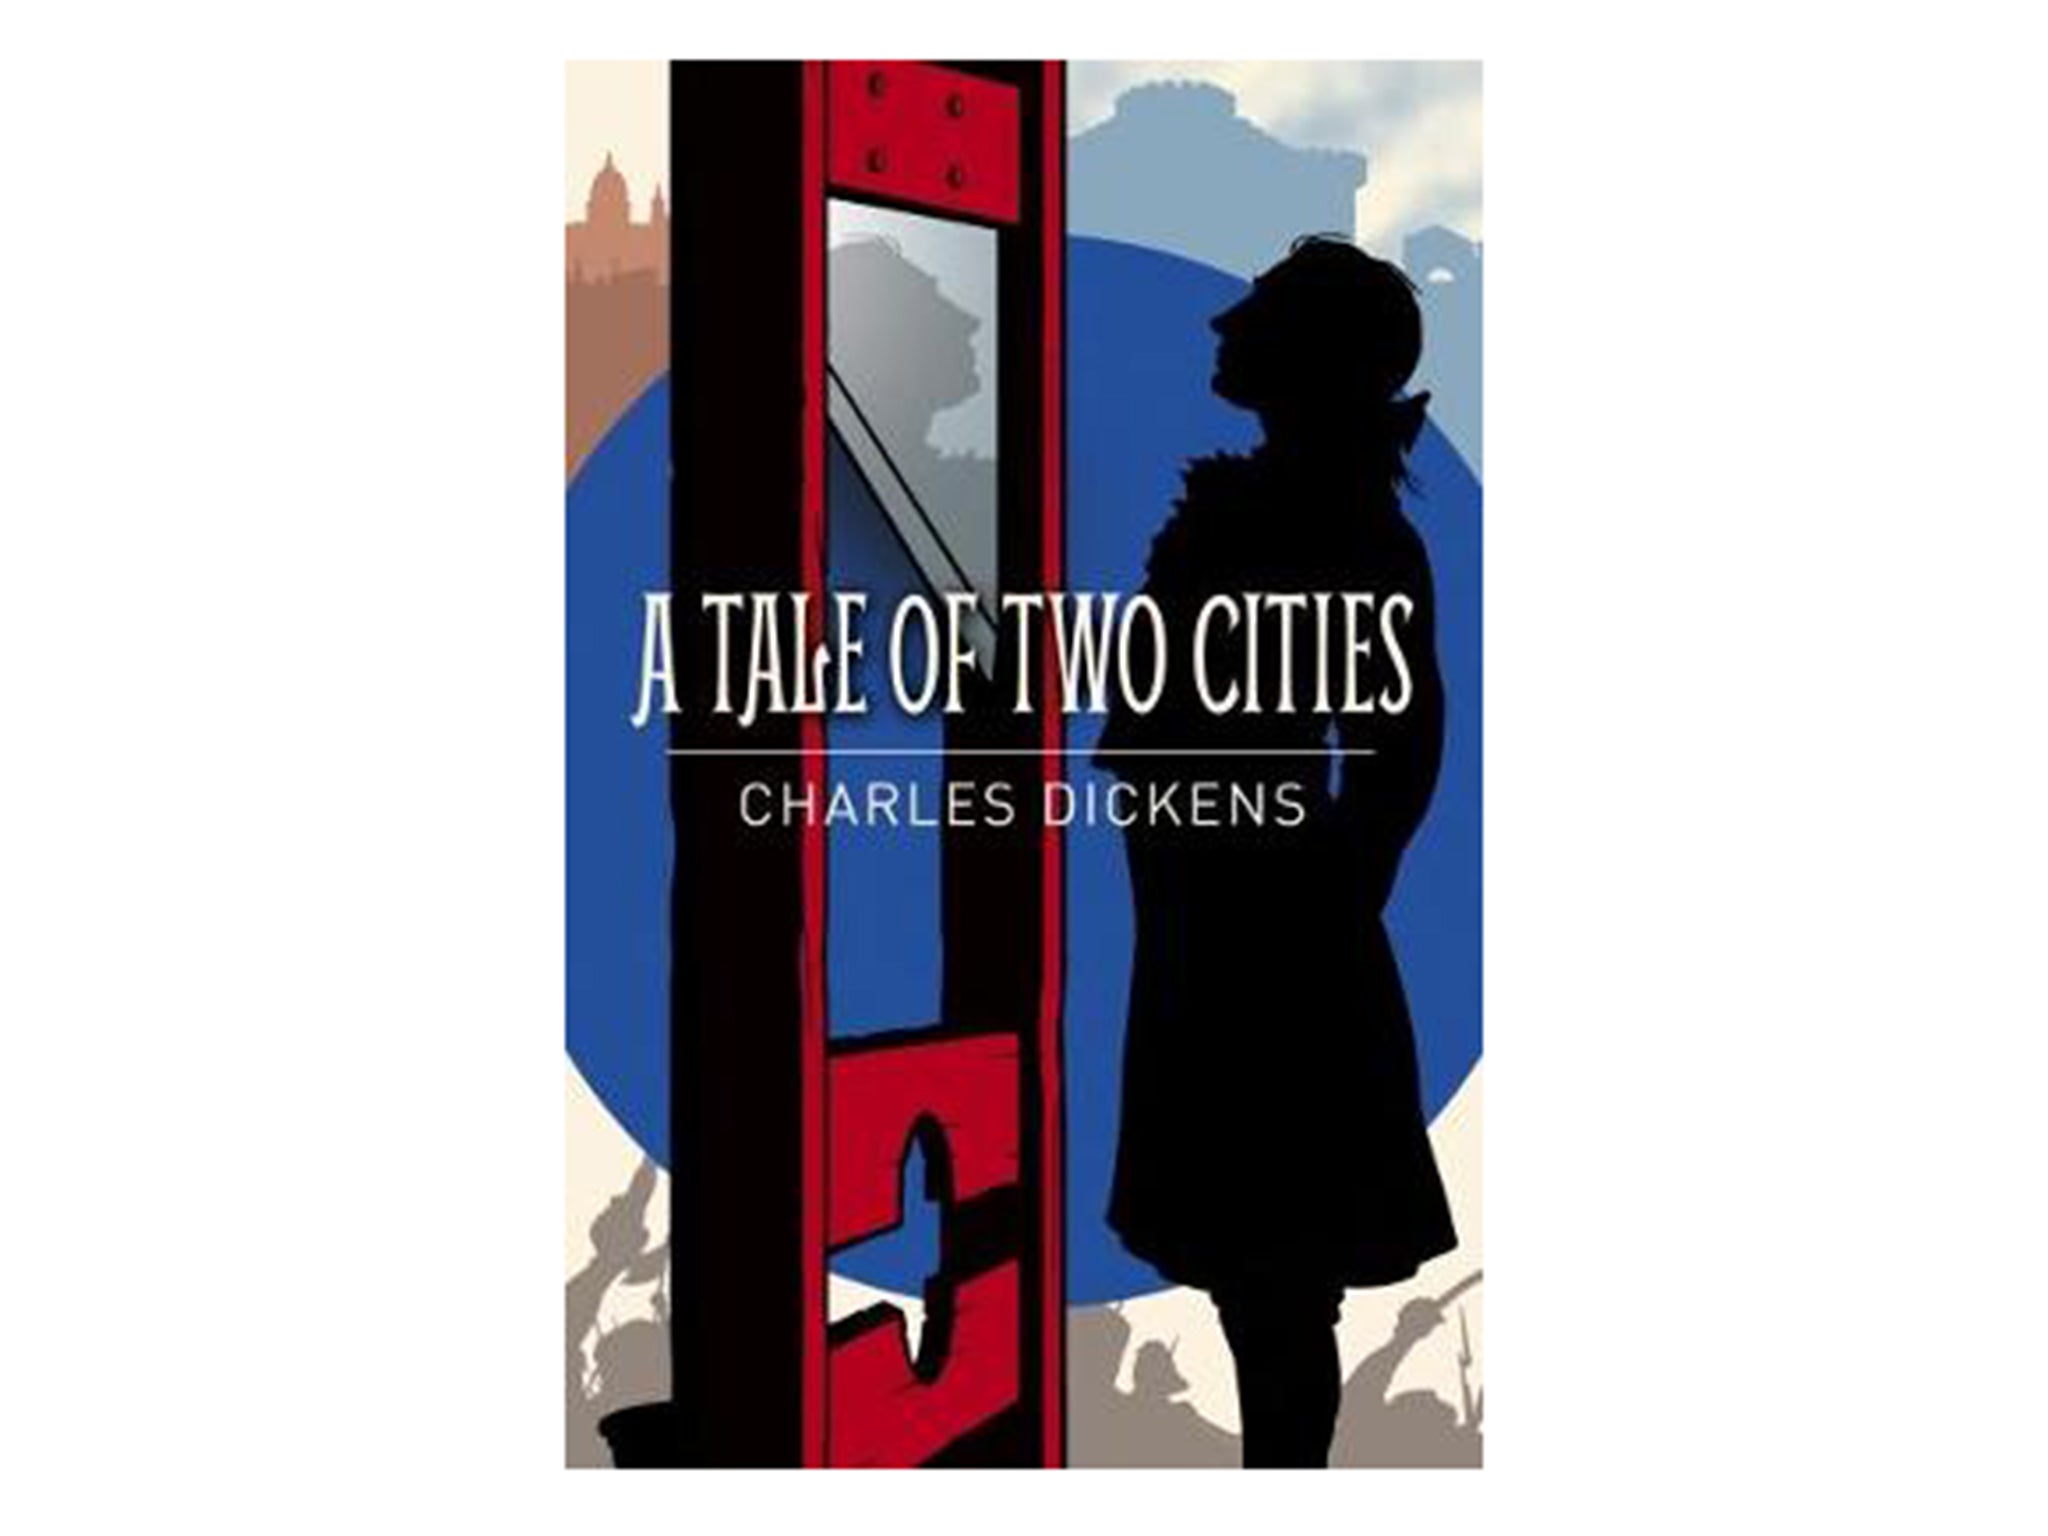 indybest-a-tale-of-two-cities-indybest-charles-dickens.jpg